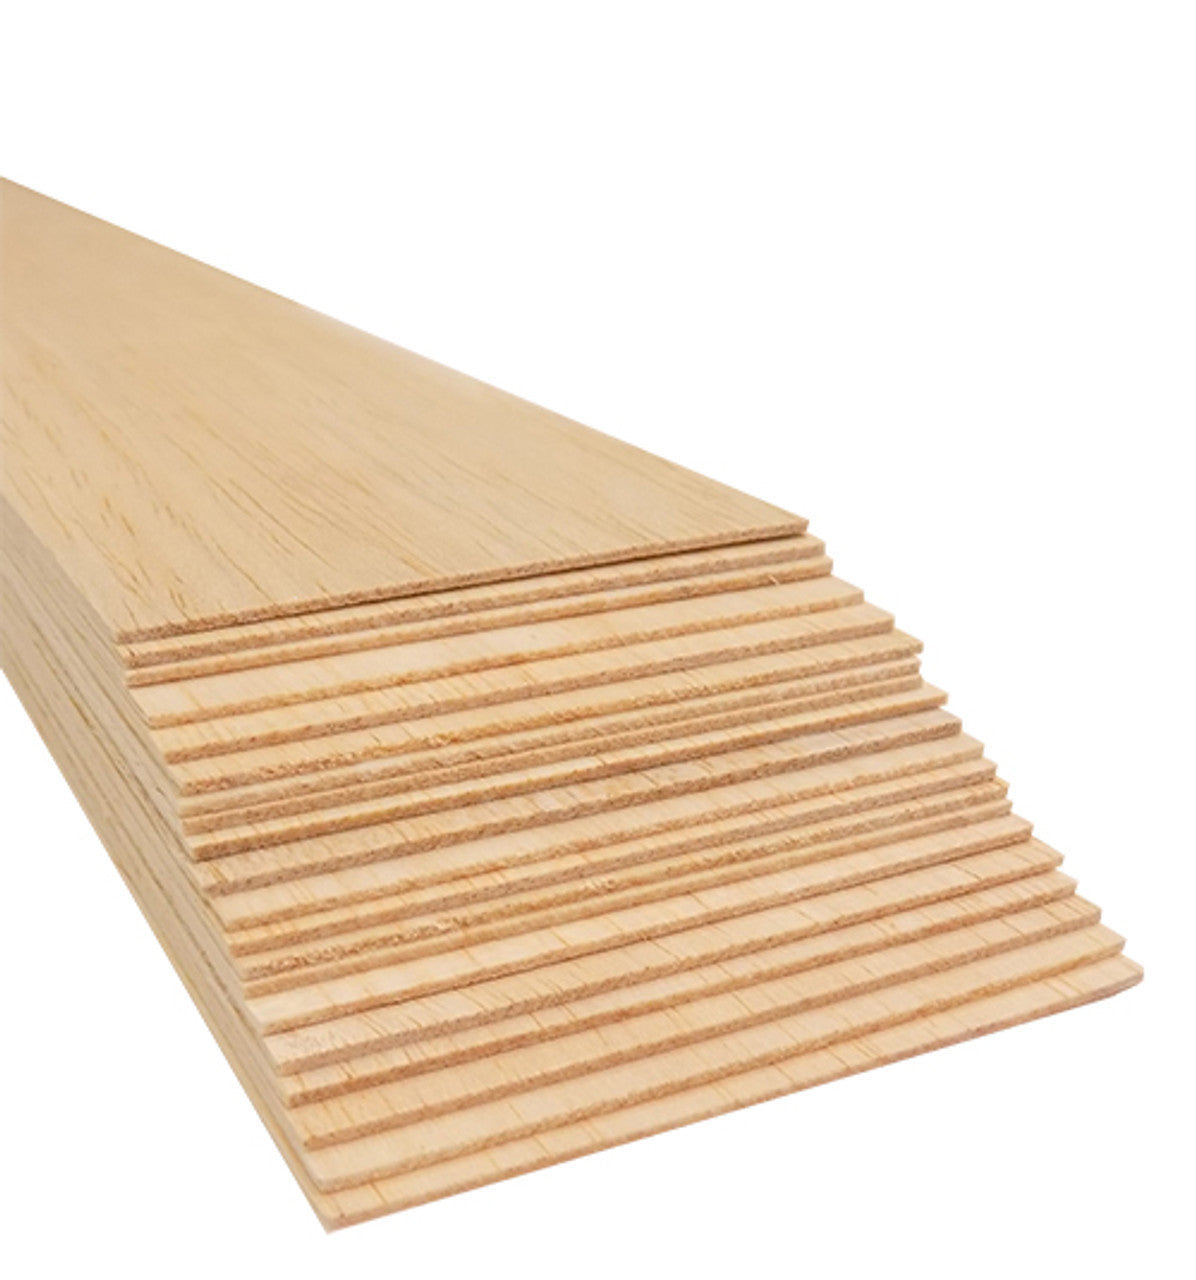 Basswood Sheets 3/32x3x24